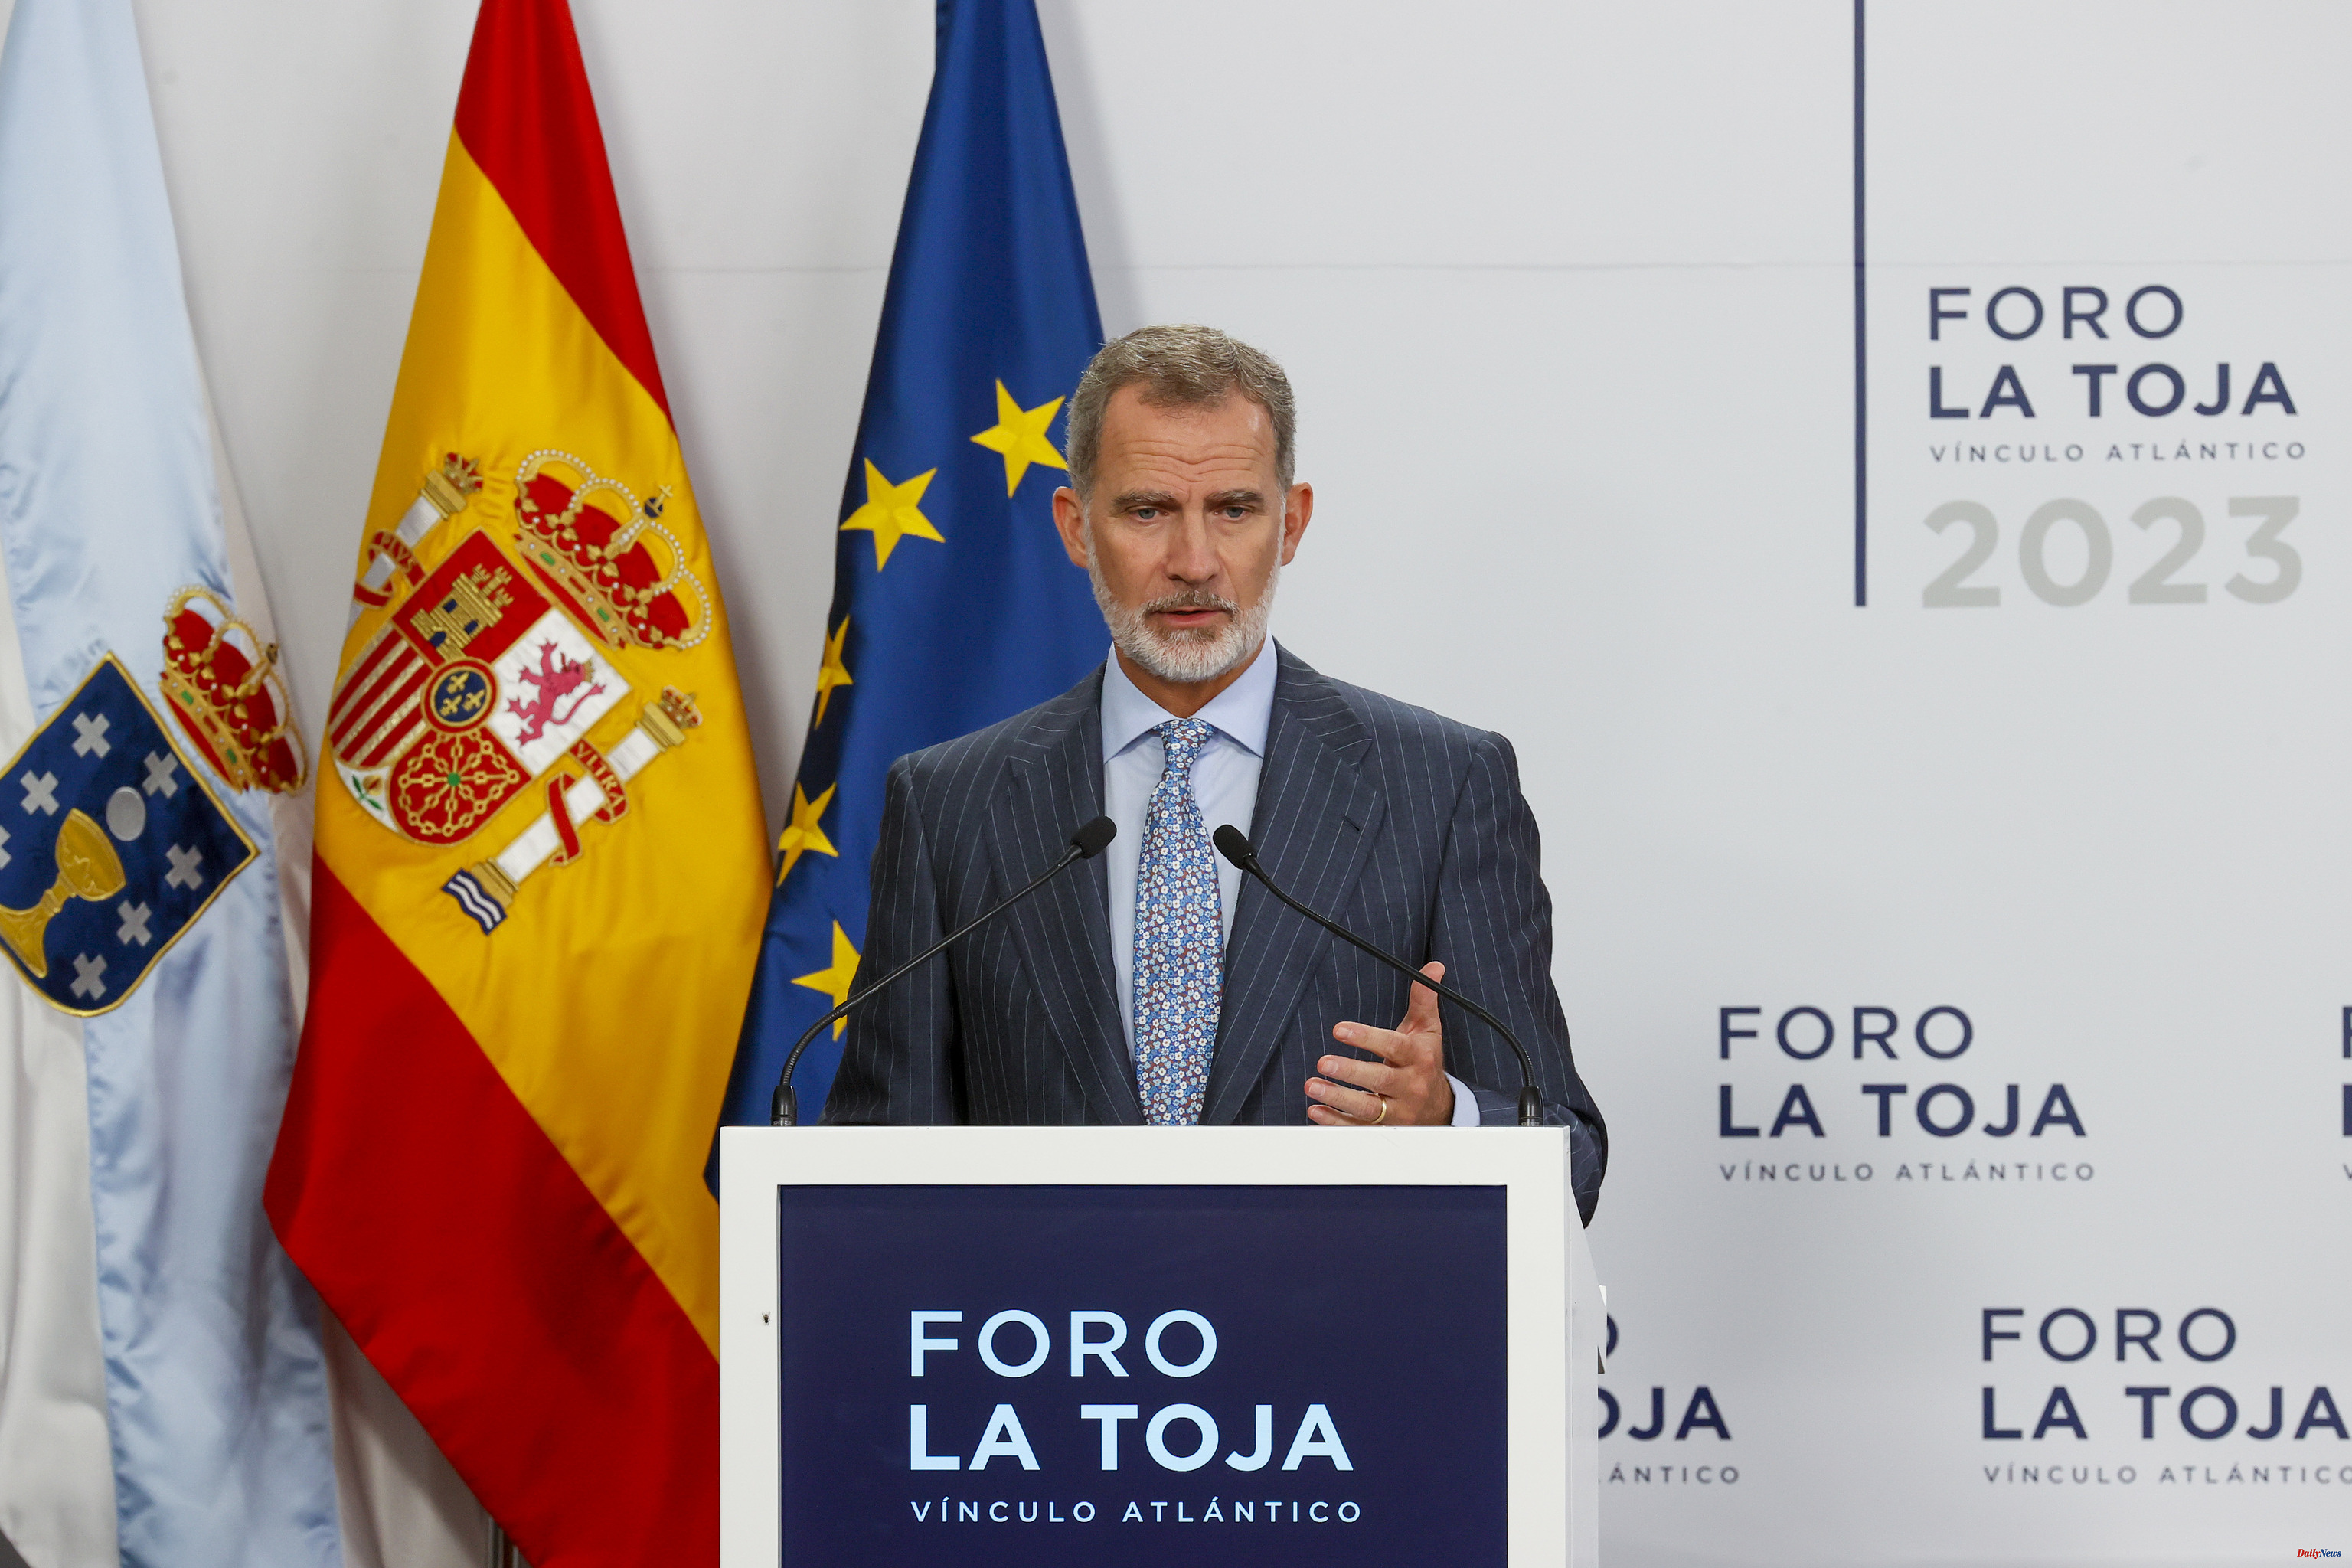 Casa Real Felipe VI appeals to "calmness and the will to understand different points of view" in "matters that mark our future and our present"